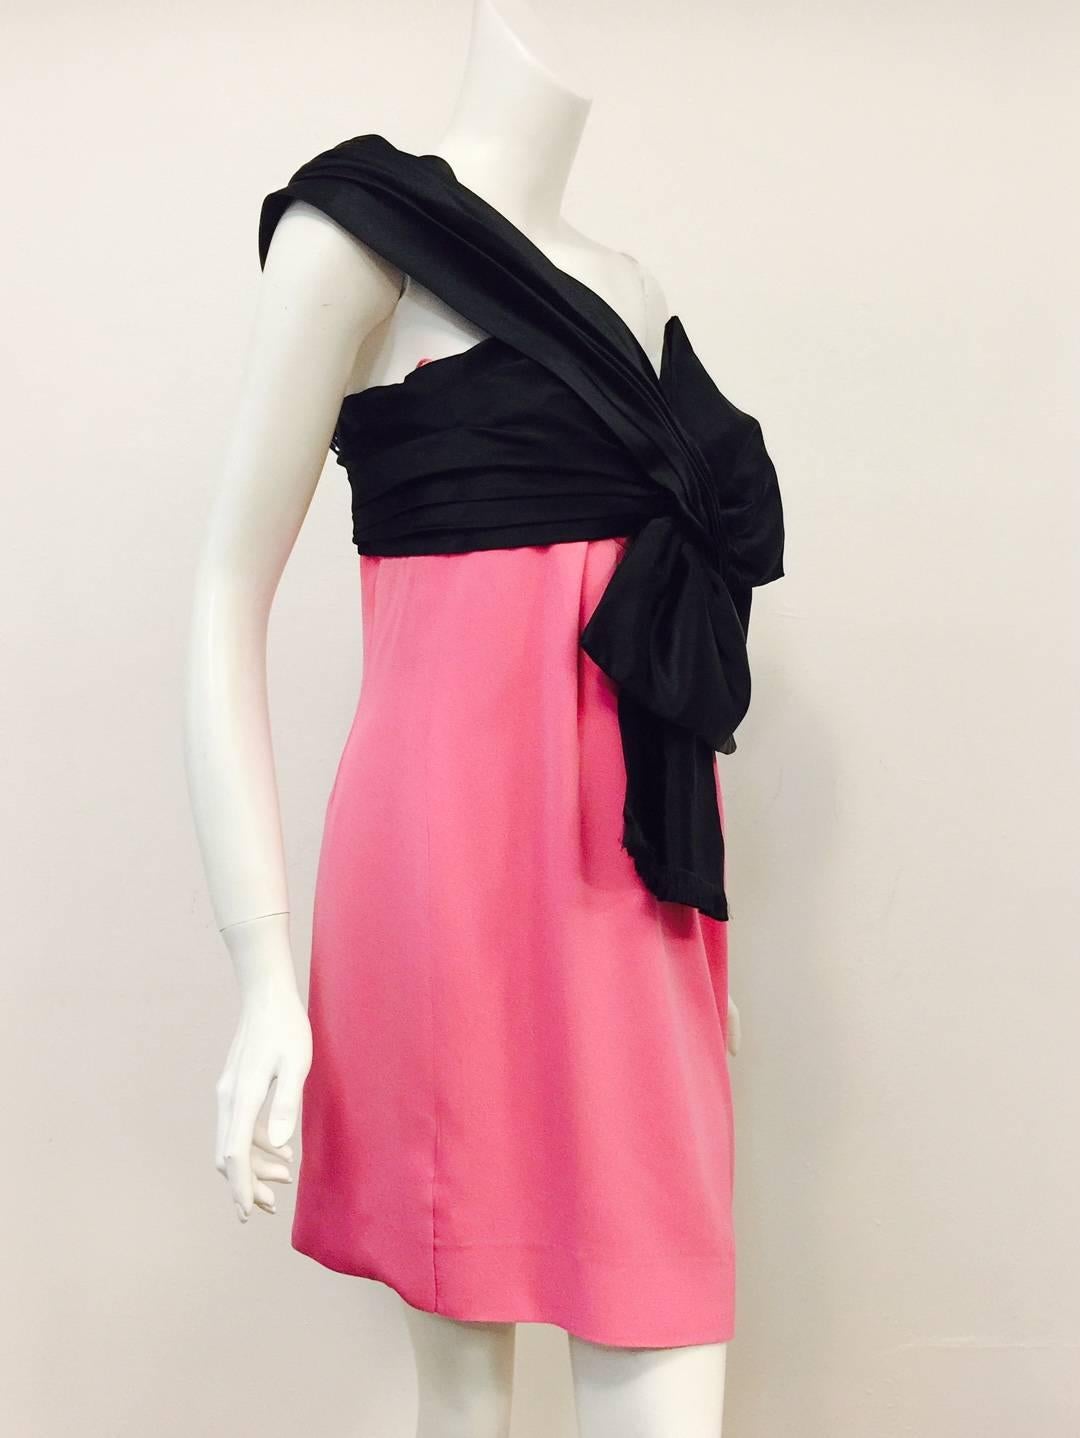 Christian Dior Boutique Black & Pink Silk One Shoulder Cocktail Dress With Bow In Excellent Condition For Sale In Palm Beach, FL